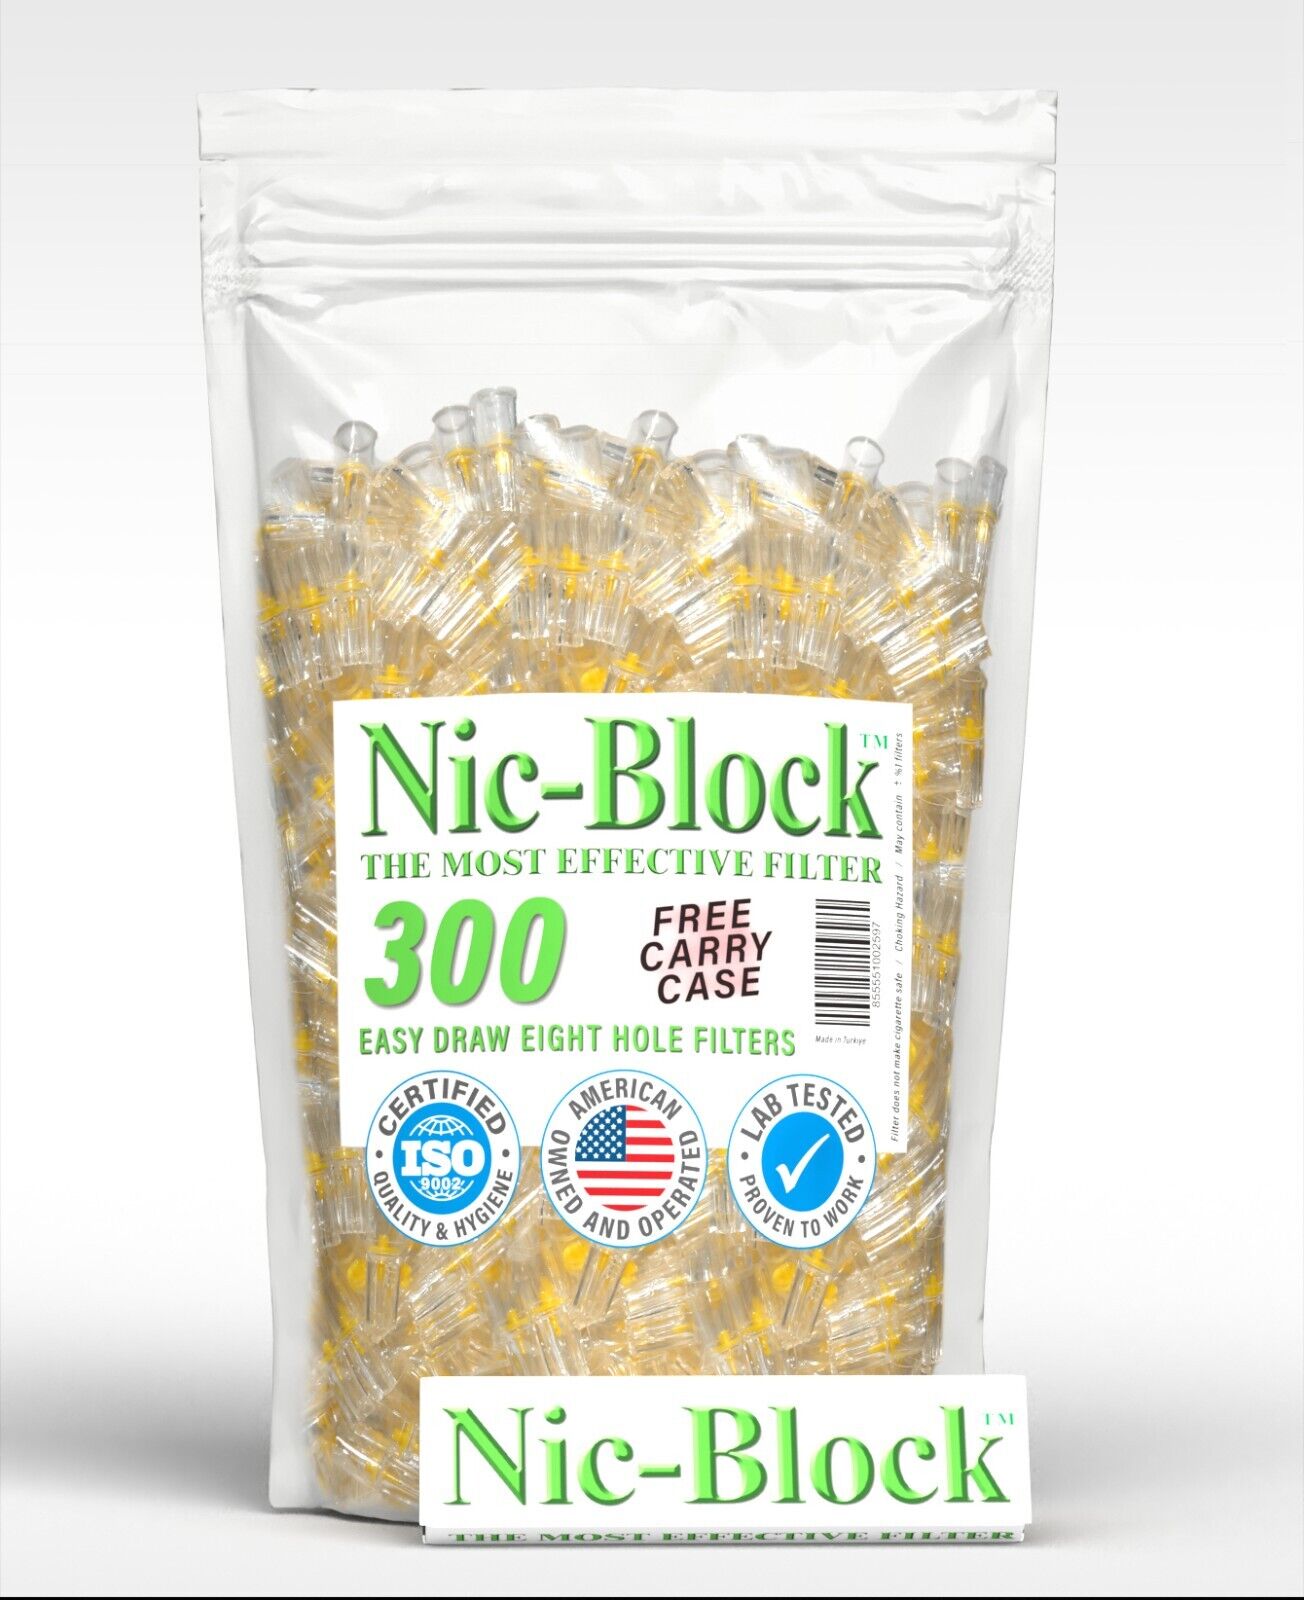 NEW NIC-BLOCK  Cigarette Filters Bulk Economy Pack 300  FILTERS TIPS FREE CASE